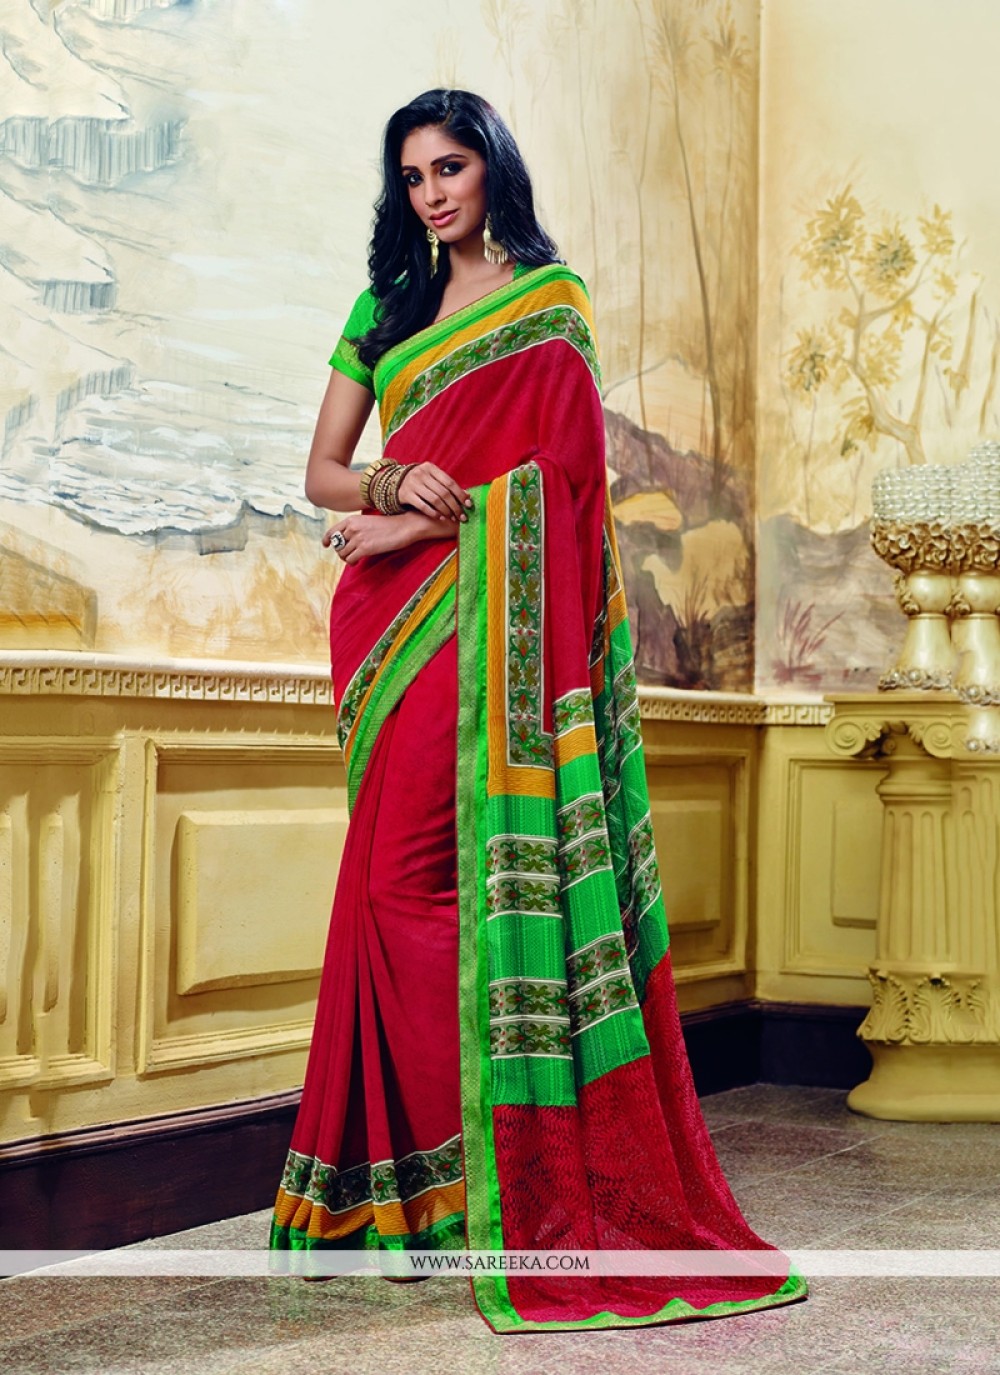 Printed Saree For Party